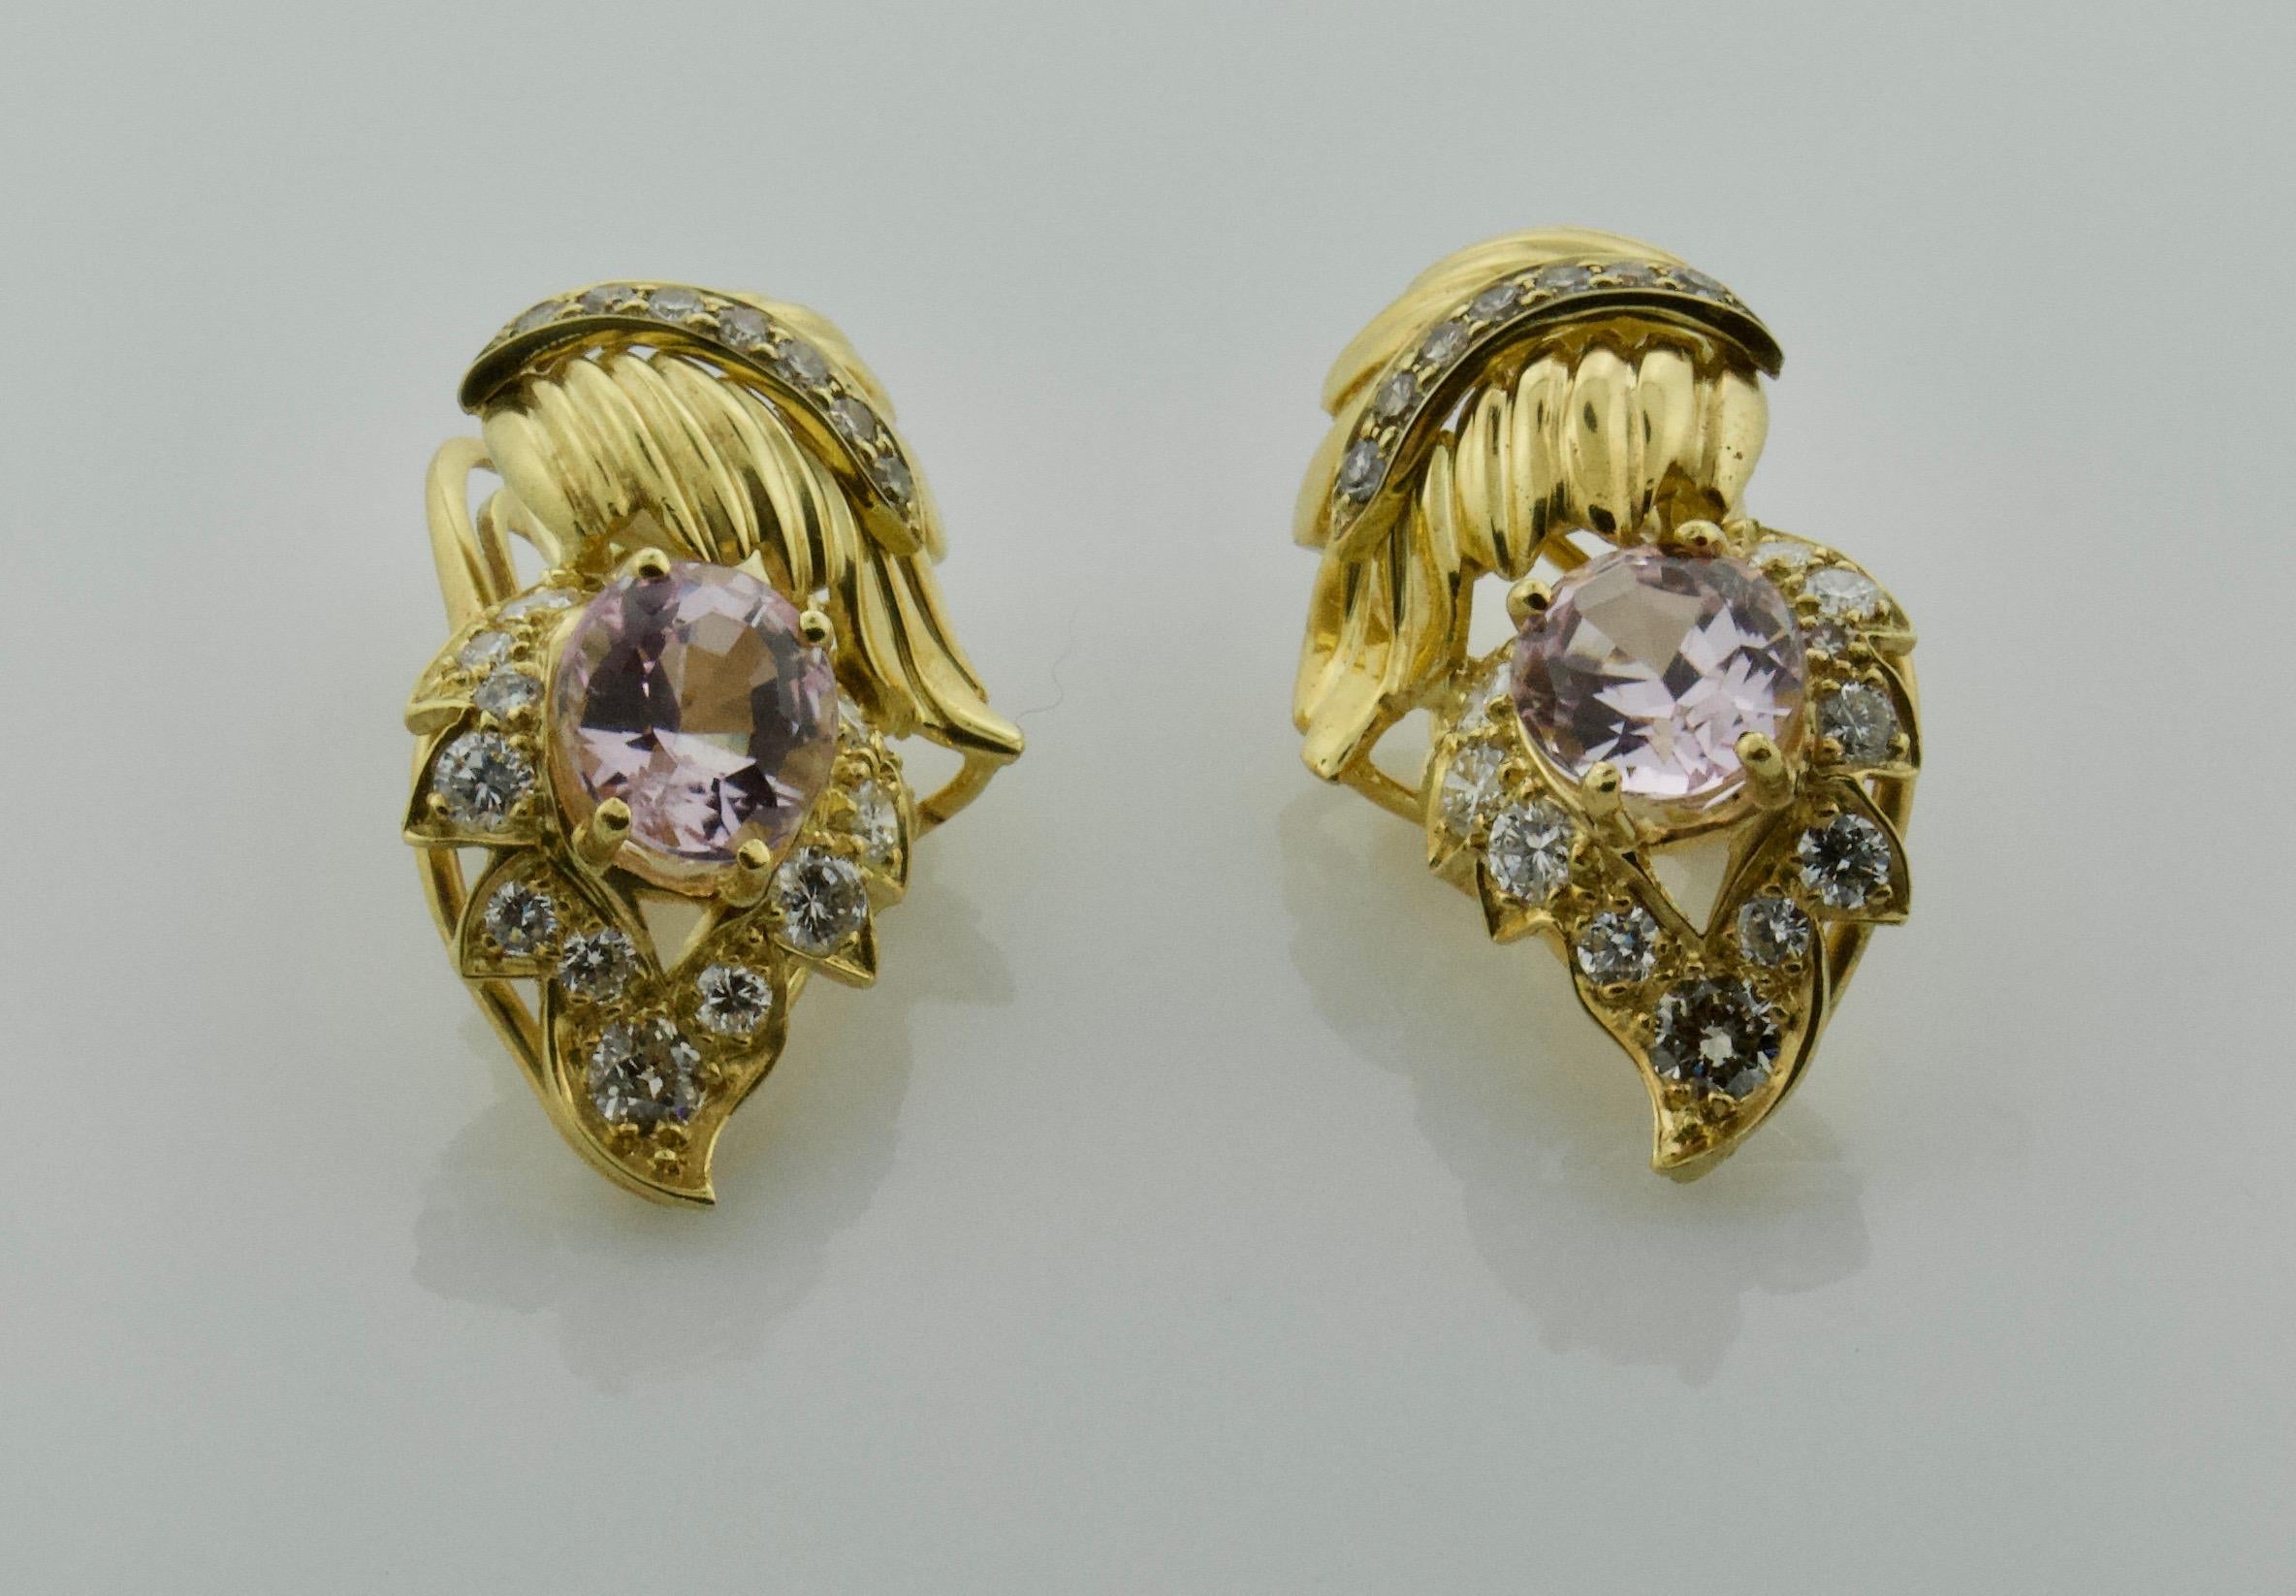 Kunzite and Diamond Leaf Design Earrings in 18k Circa 1960's 
Handmade Left and Right
Two Oval Cut Kunzites weighing 5.50 carats approximately [bright with no imperfections visible to the naked eye]
Thirty Four Round Diamonds weighing 1.70 carats